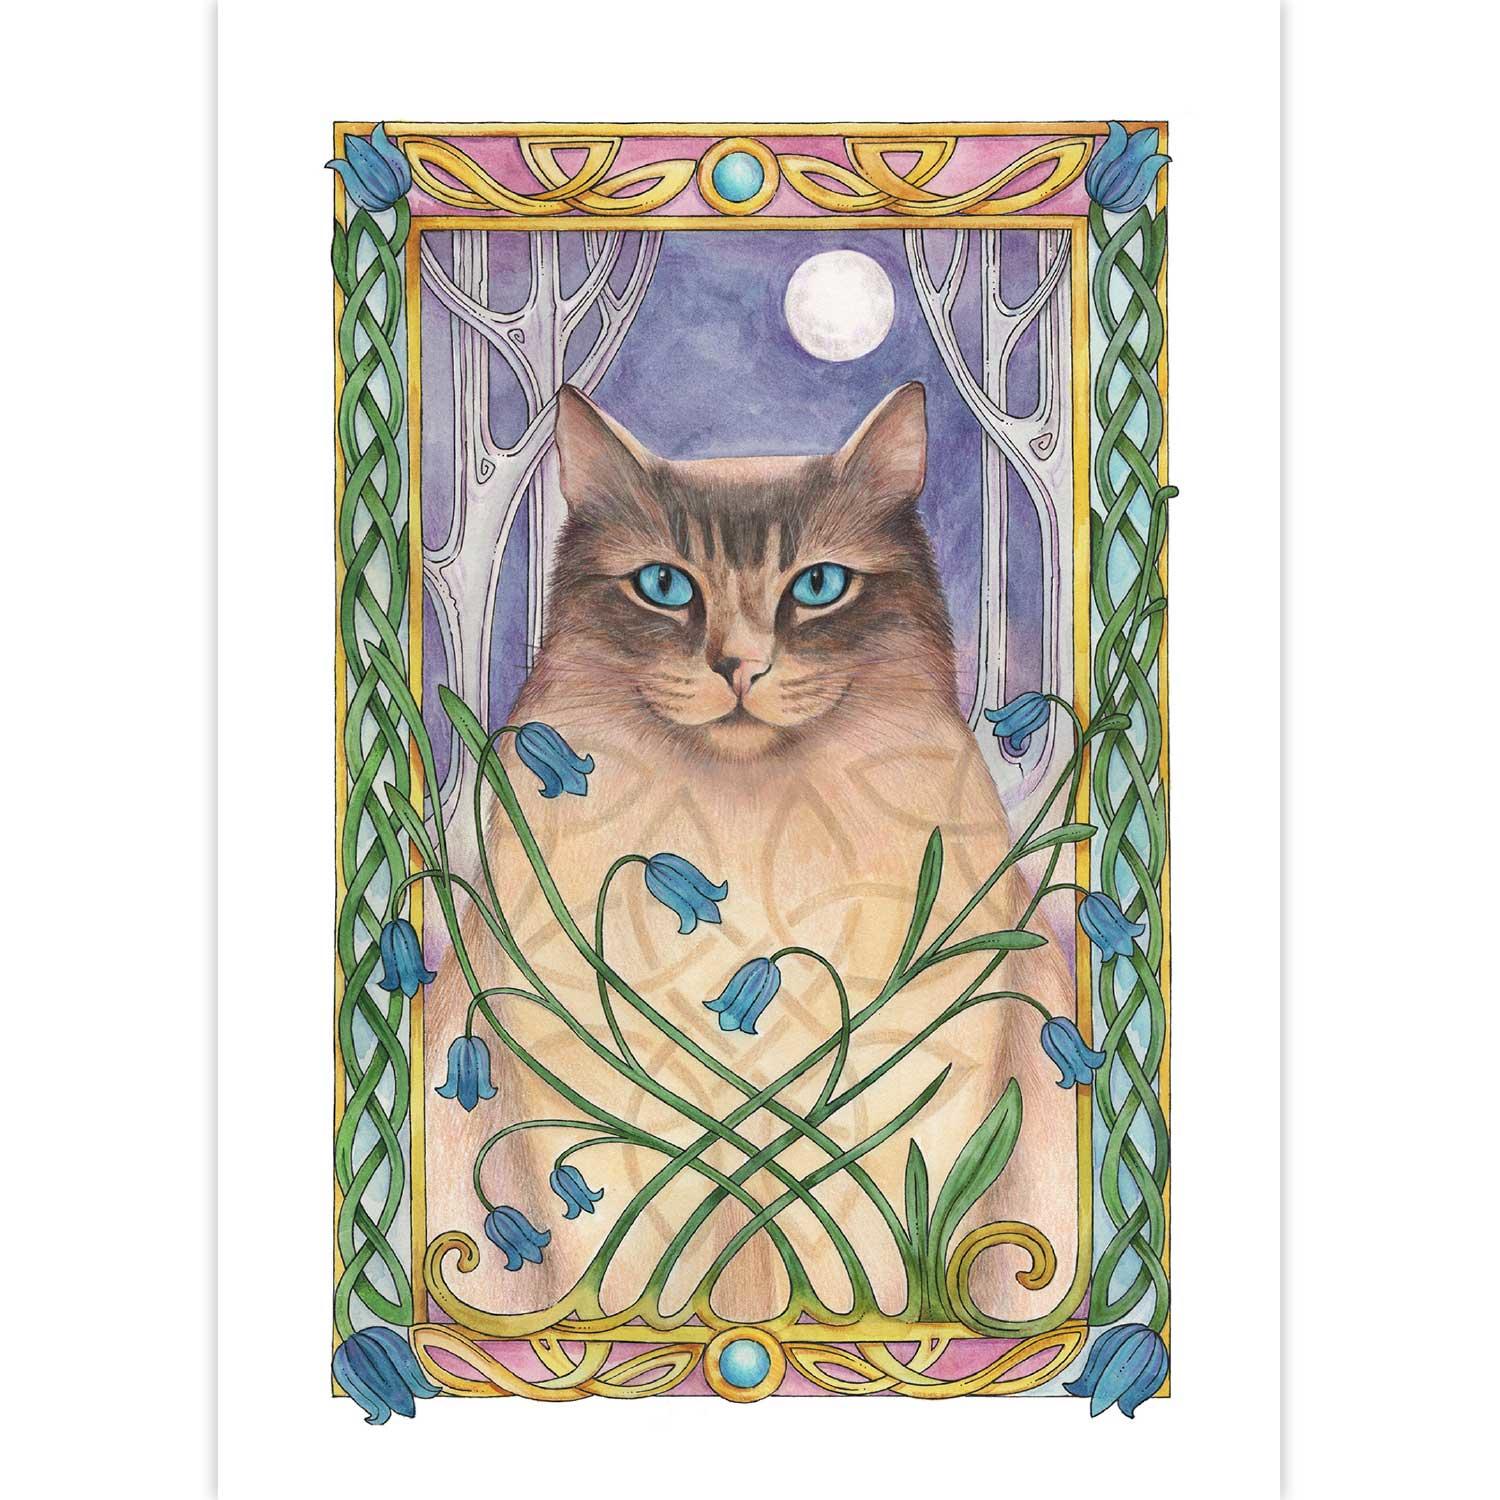 Moon Meow by artist Marjory Tait